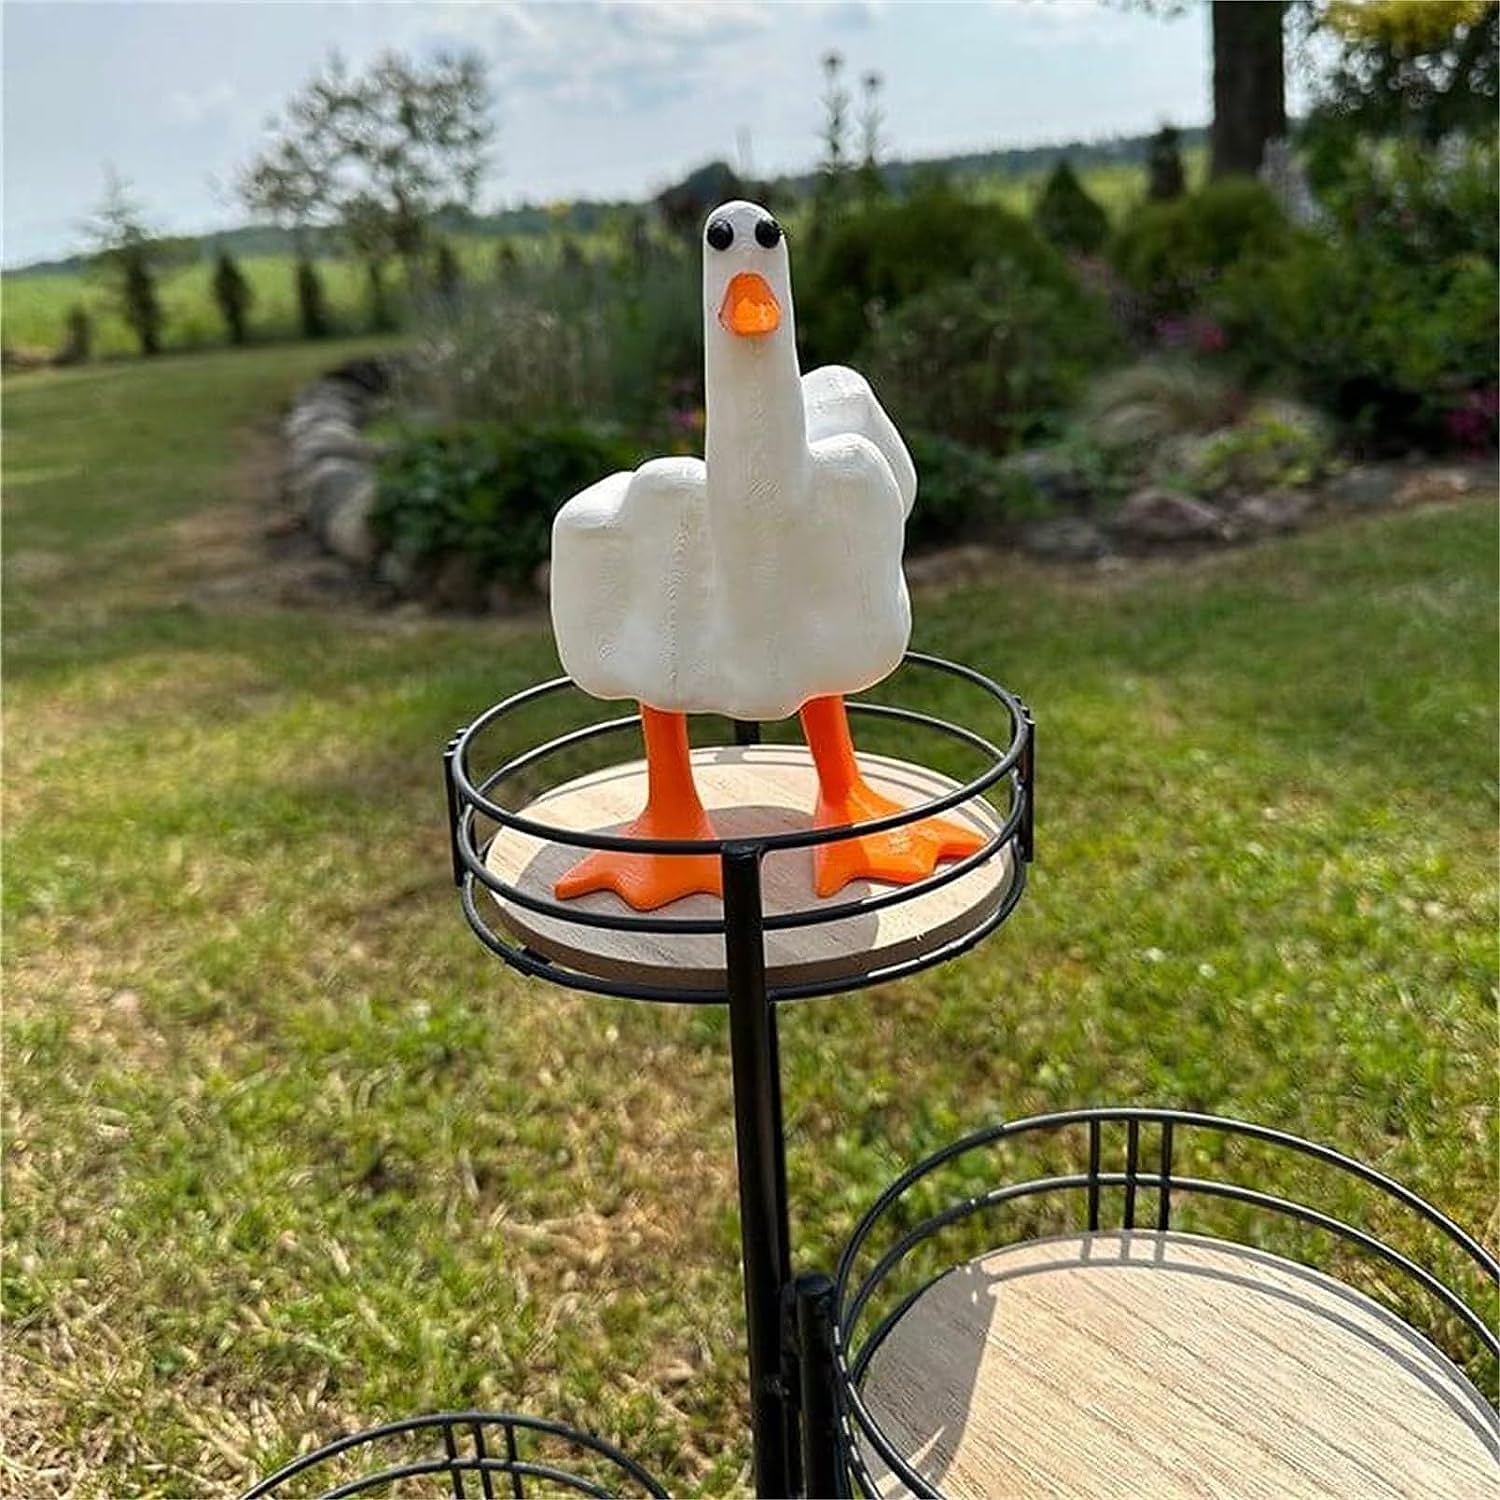 New Duck You Refers To The Cartoon Duck Resin Crafts Garden Sculpture Decoration Design Micro-Landscape 2023 - GBP £9 –P3